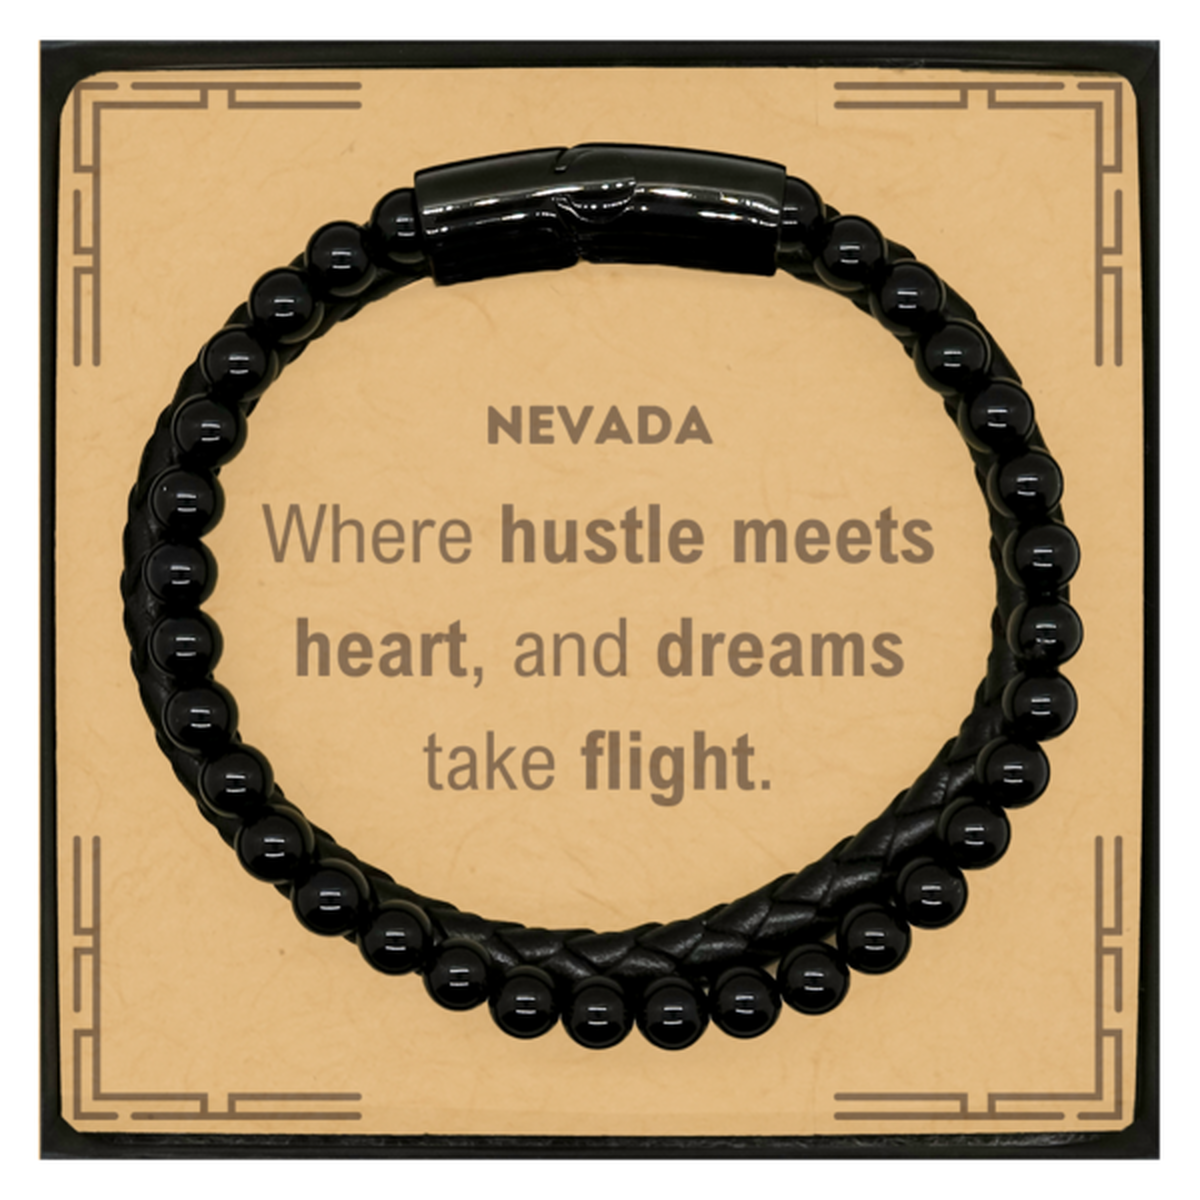 Nevada: Where hustle meets heart, and dreams take flight, Nevada Card Gifts, Proud Nevada Christmas Birthday Nevada Stone Leather Bracelets, Nevada State People, Men, Women, Friends